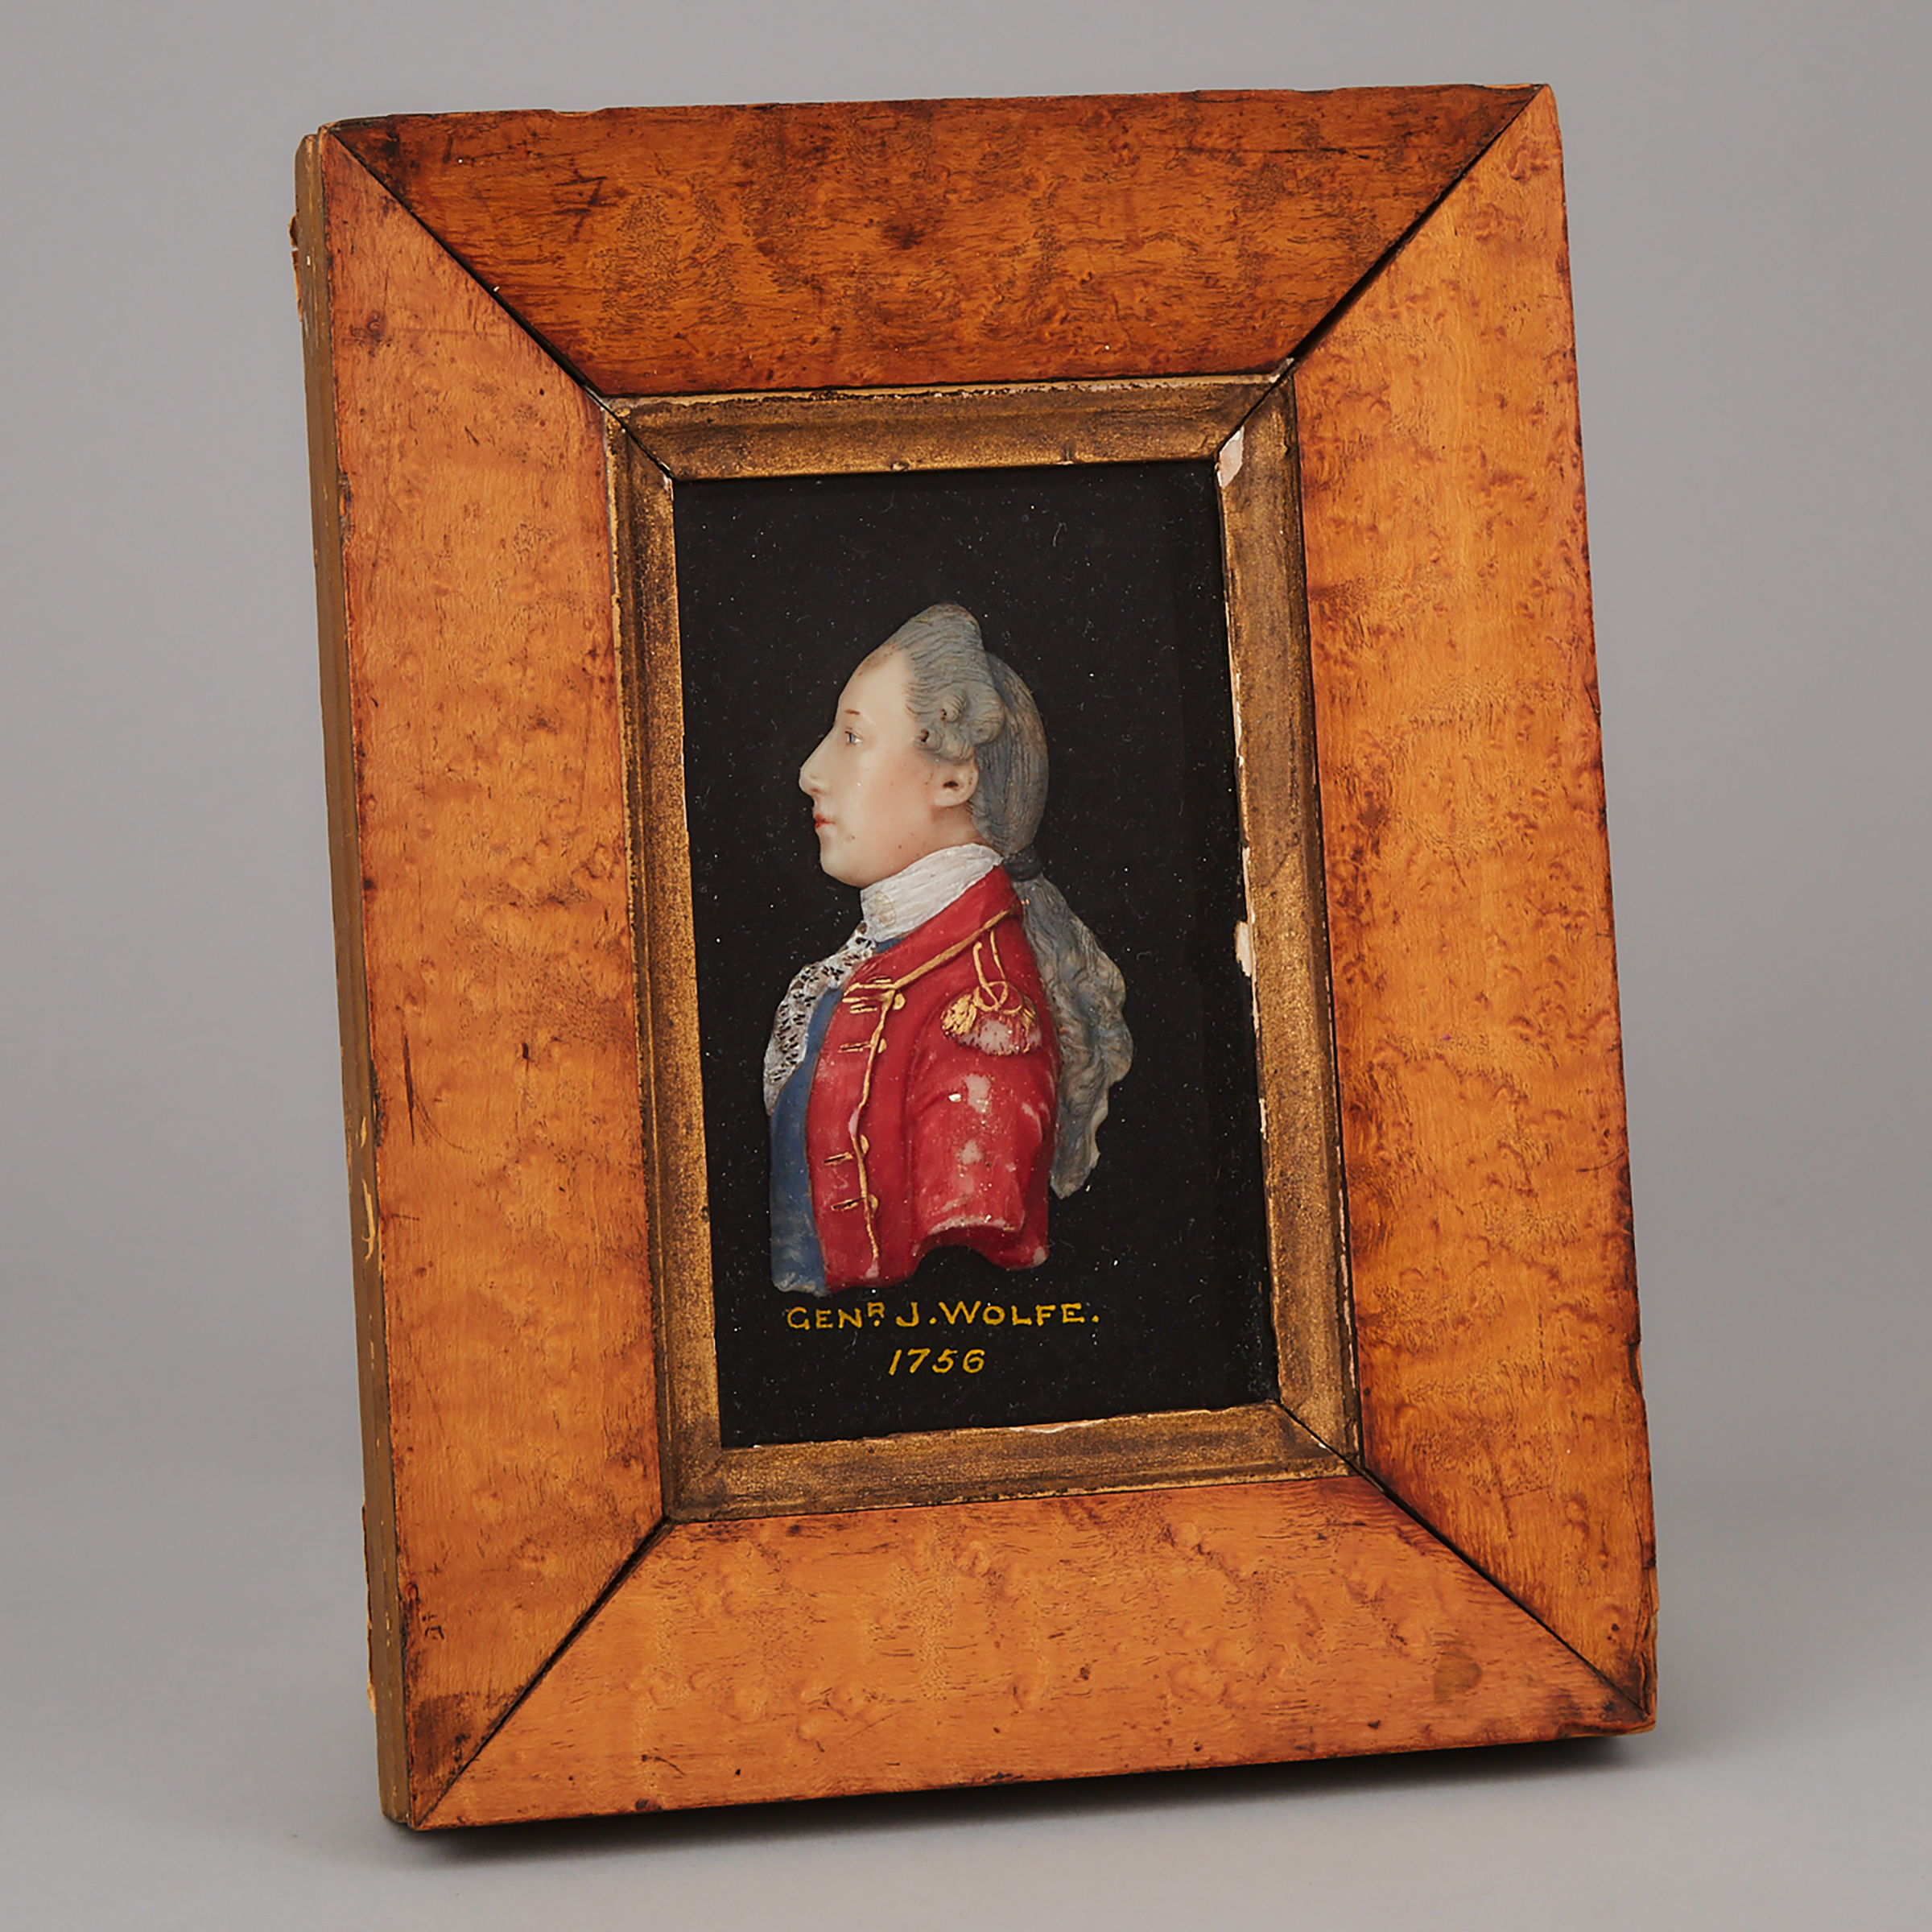 Painted Wax Relief Portrait Profile Bust of General James Wolfe, mid 19th century